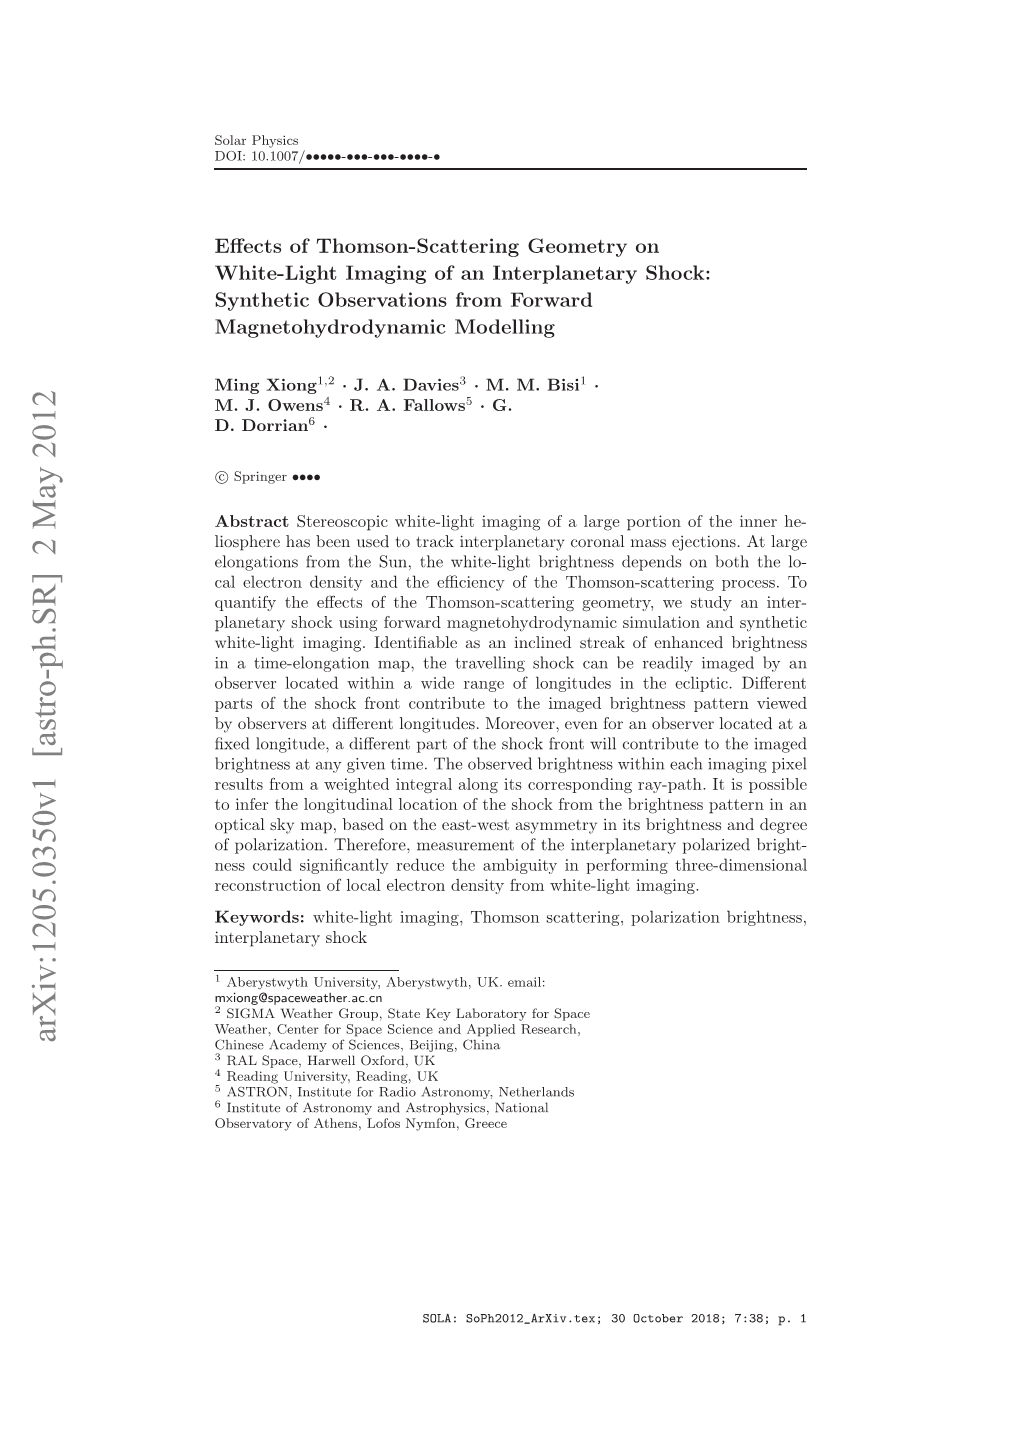 Effects of Thomson-Scattering Geometry on White-Light Imaging Of